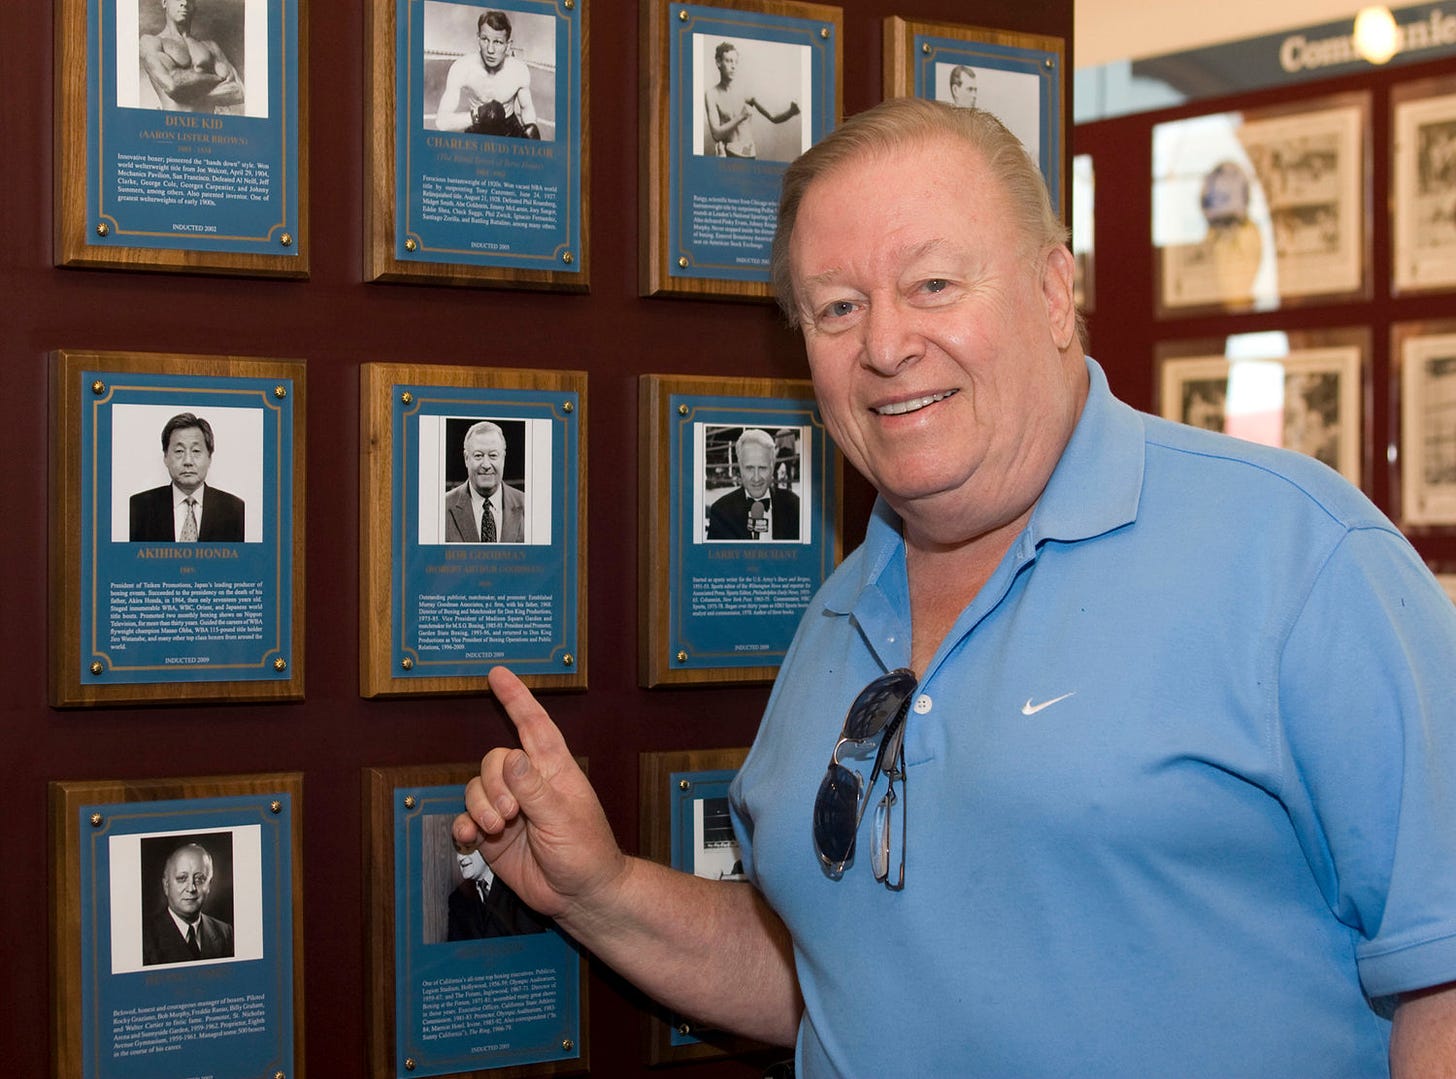 Hall of Fame boxing matchmaker and publicist Robert “Bobby” Goodman, who promoted two major Muhammad Ali fights in the 1970s, has died. He was 83. Pictured is 2009 International Boxing Hall of Fame inductee Goodman by his plaque on the Hall of Fame wall in Canastota.